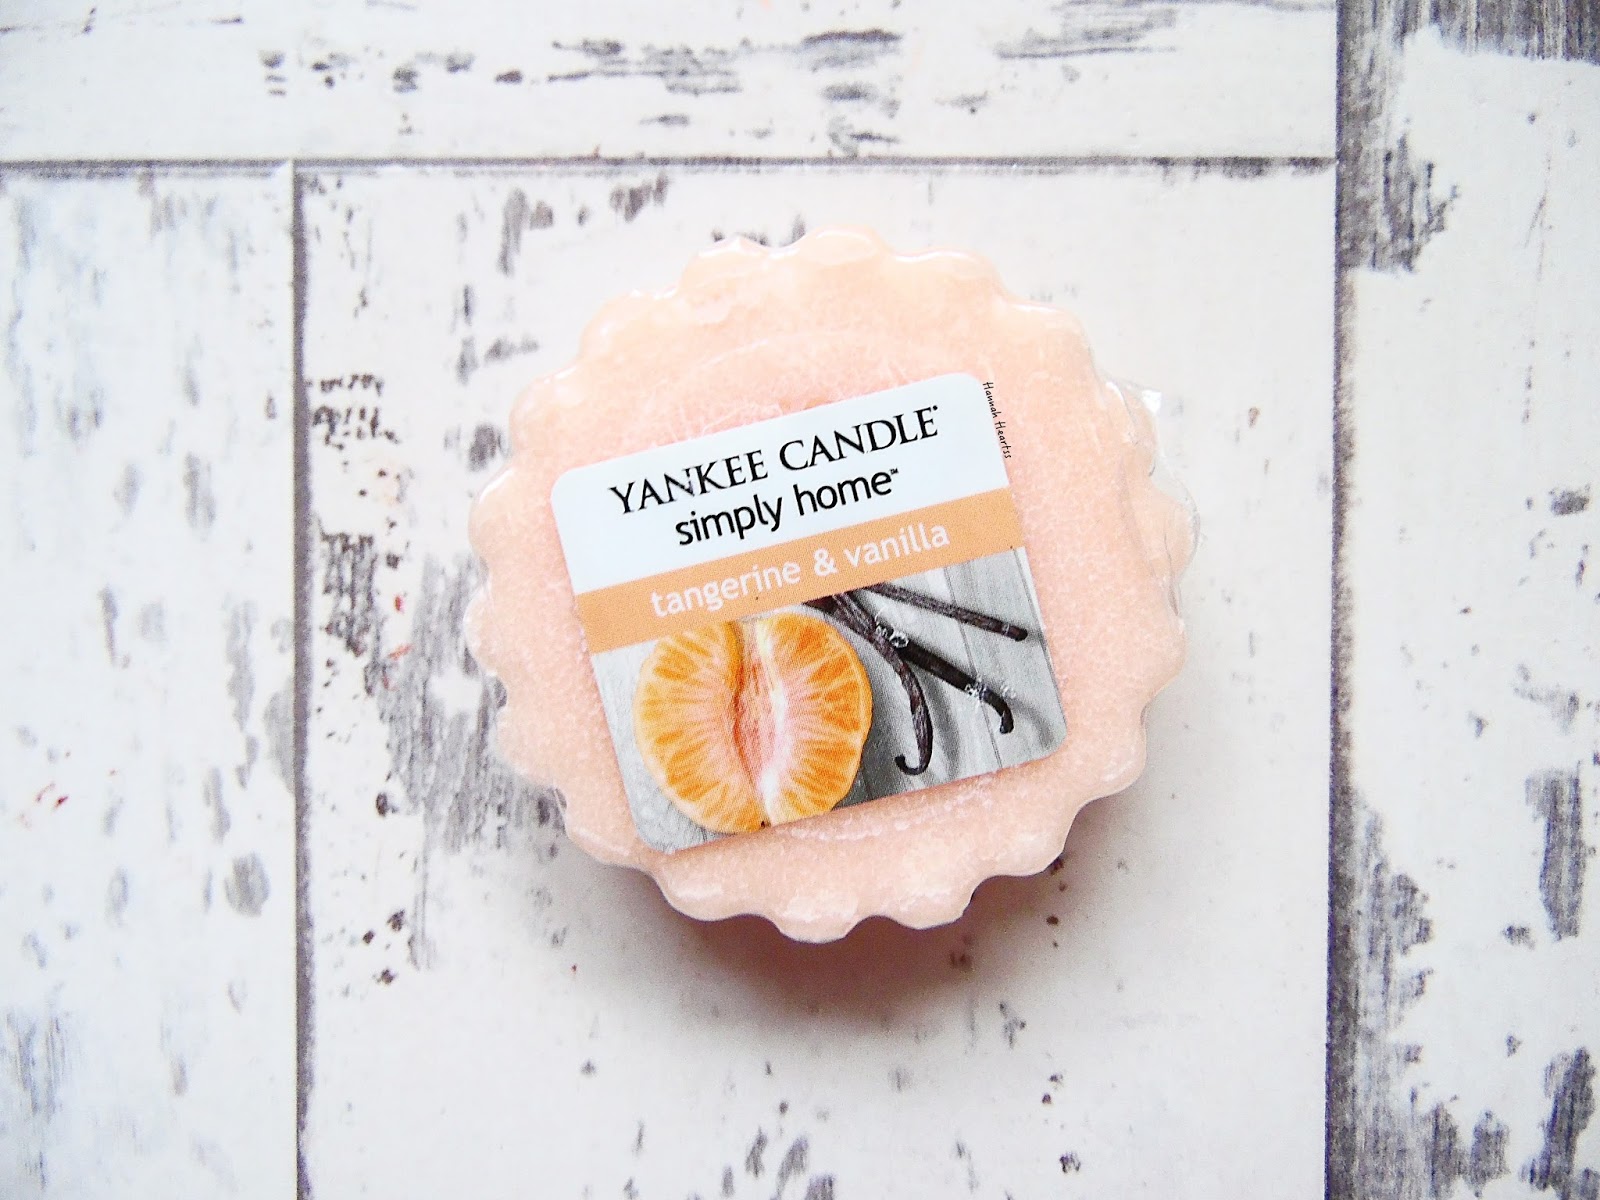 Yankee Candle Wax Melts Reviews - March 2023